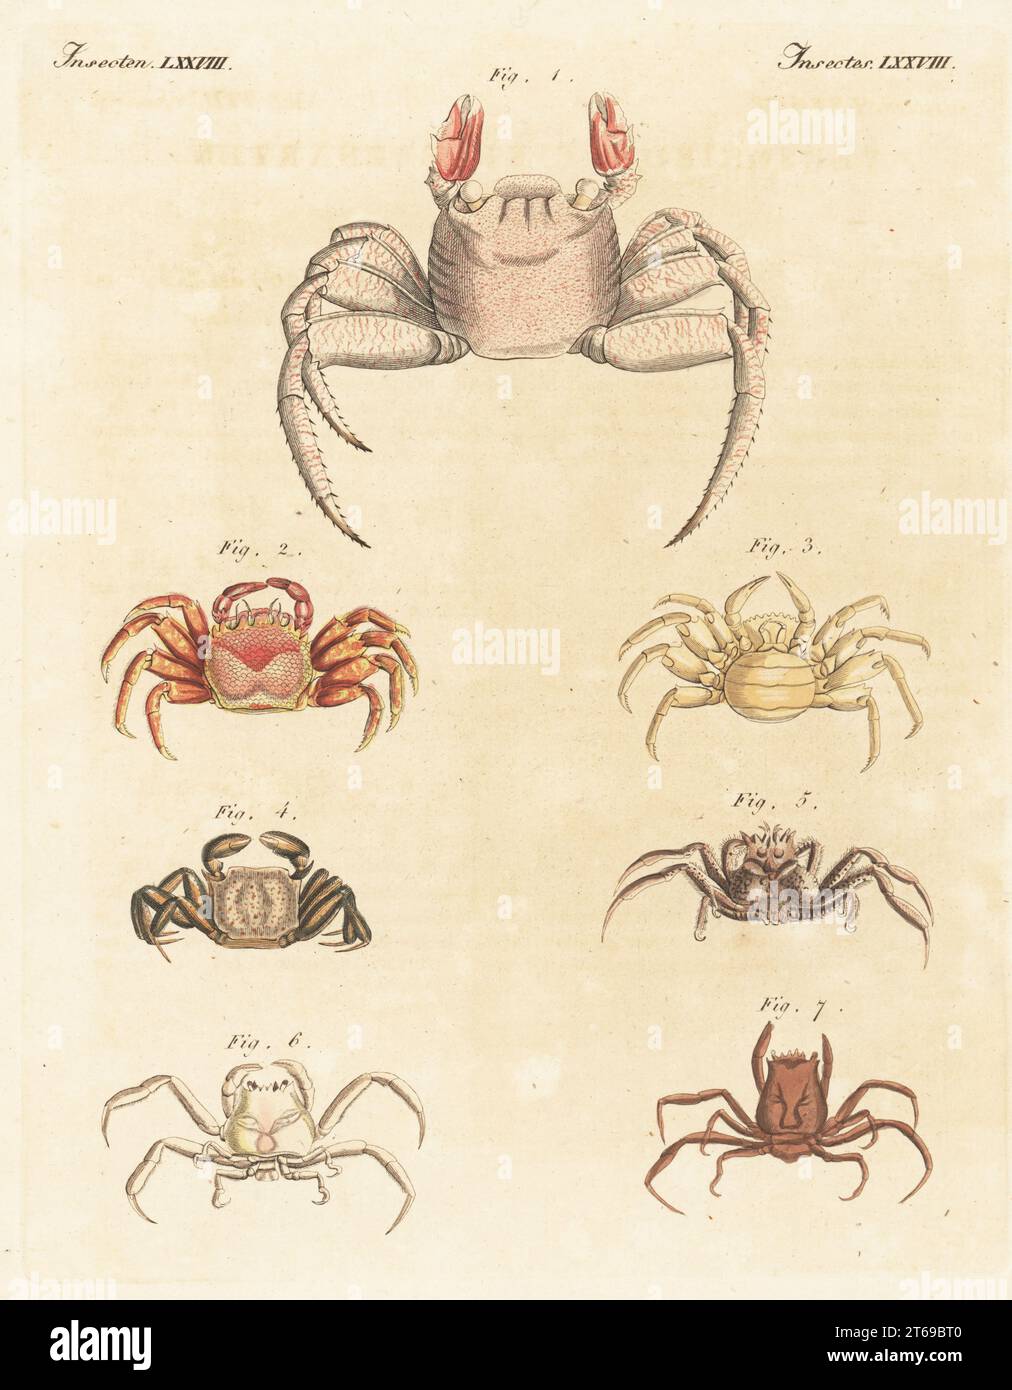 Painted crab of Ambon, Maluku, Cancer pictus 1, flattened crab, Plagusia depressa 2, Risso's crab, Xantho poressa 3, unknown species, Cancer nodulosus 4, Dorippoides facchino 5, and stalkeye porter crab, Ethusa mascarone 6,7. Handcoloured copperplate engraving from Carl Bertuch's Bilderbuch fur Kinder (Picture Book for Children), Weimar, 1815. A 12-volume encyclopedia for children illustrated with almost 1,200 engraved plates on natural history, science, costume, mythology, etc., published from 1790-1830. Stock Photo